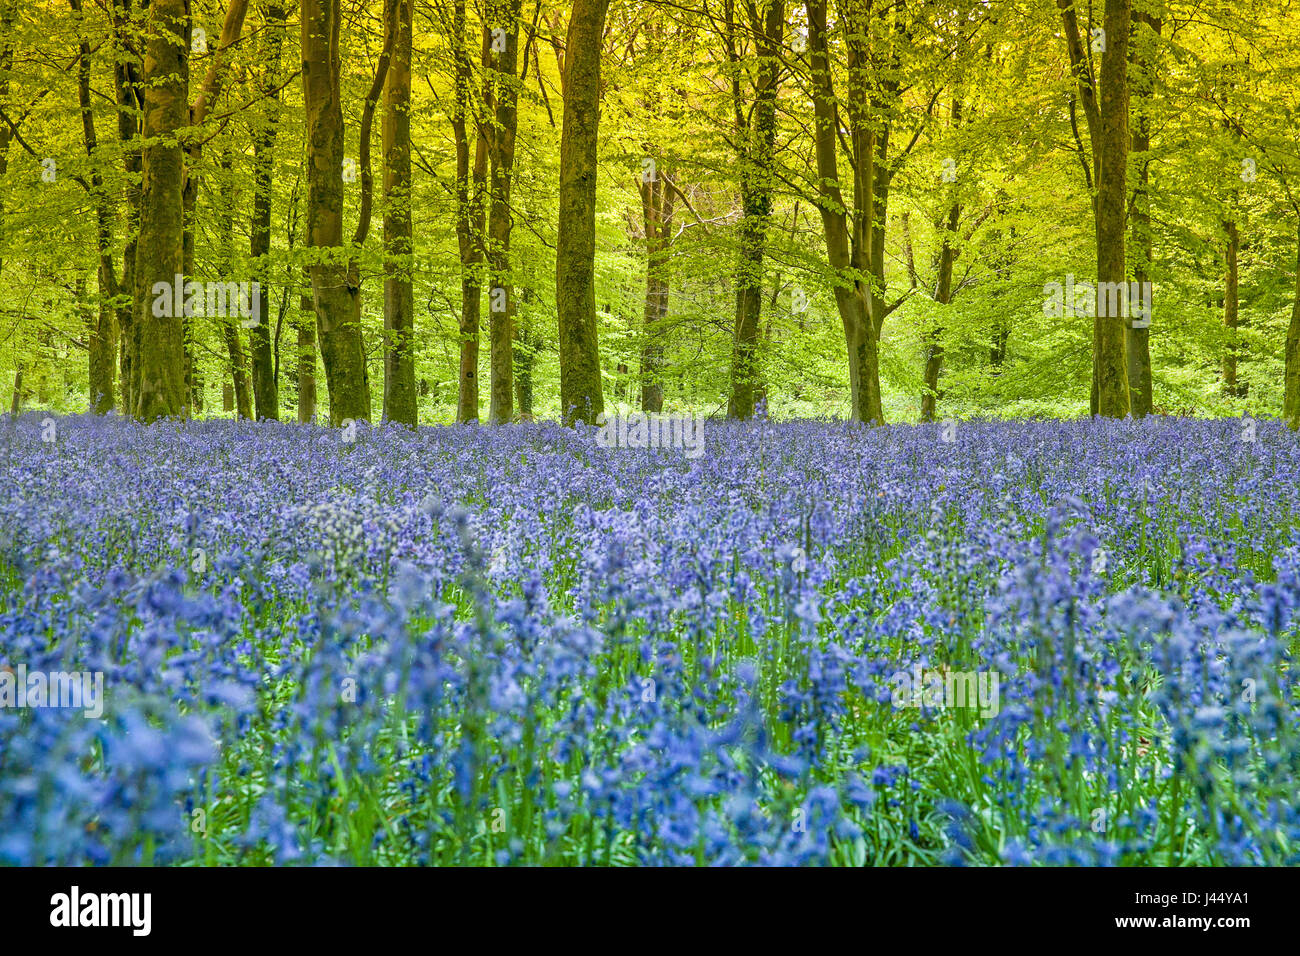 A carpet of bluebells under beech trees in ancient Dorset woodland and where the evening light was just beginning to show through the bluebell stems Stock Photo